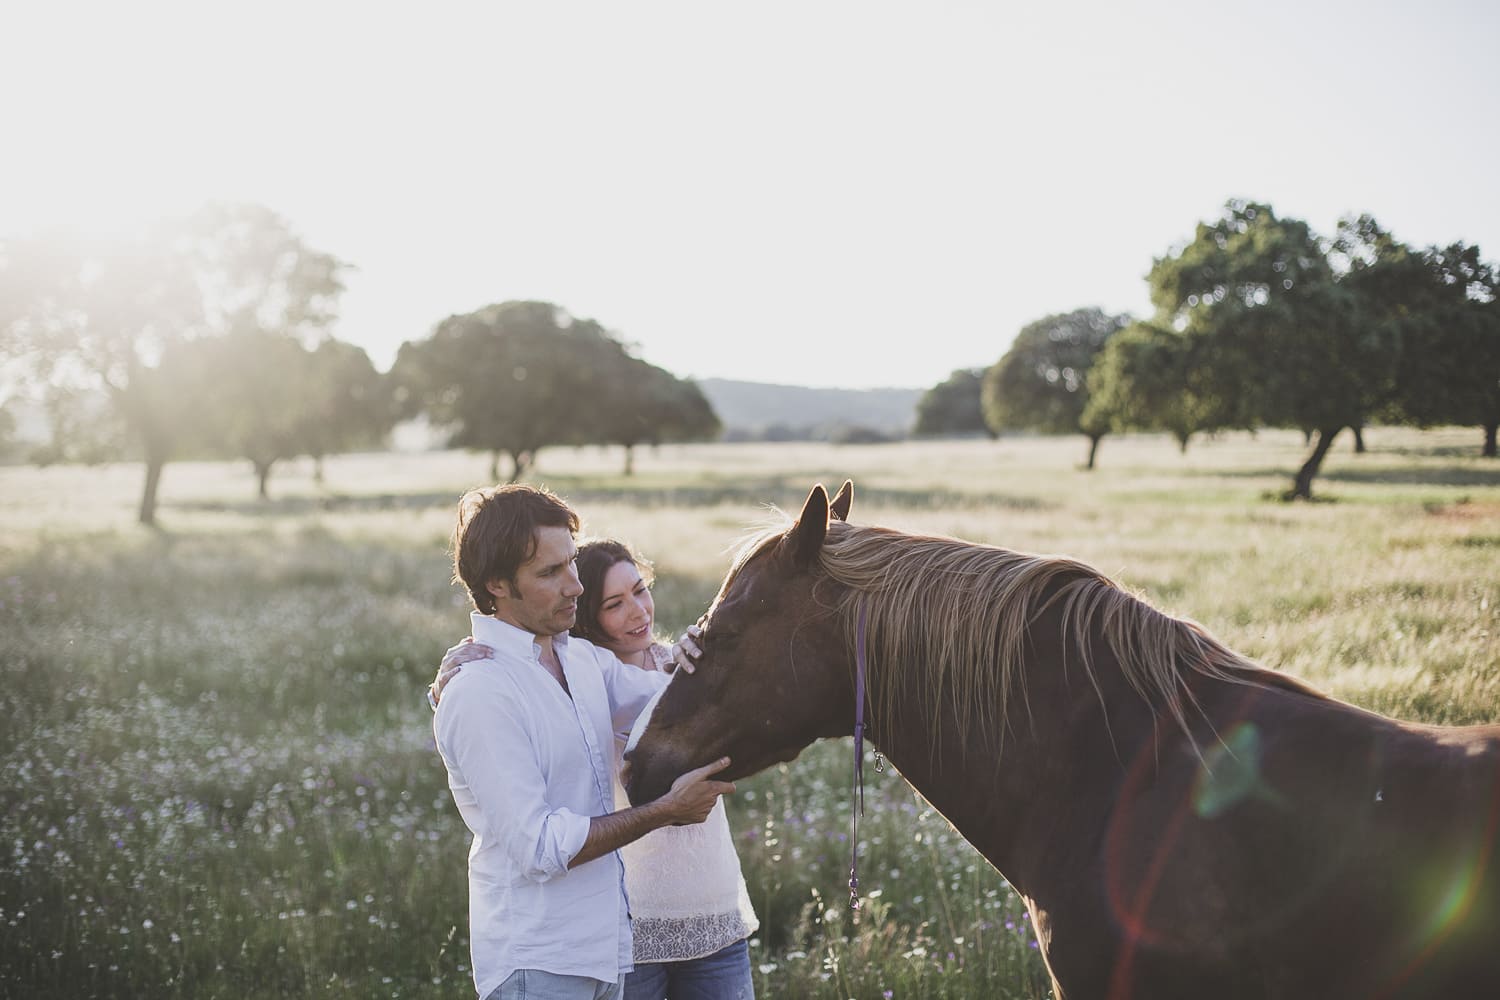 spain countryside pre wedding photographer rustic natural modern at the beautiful landscapes with horses portugal sintra cascais